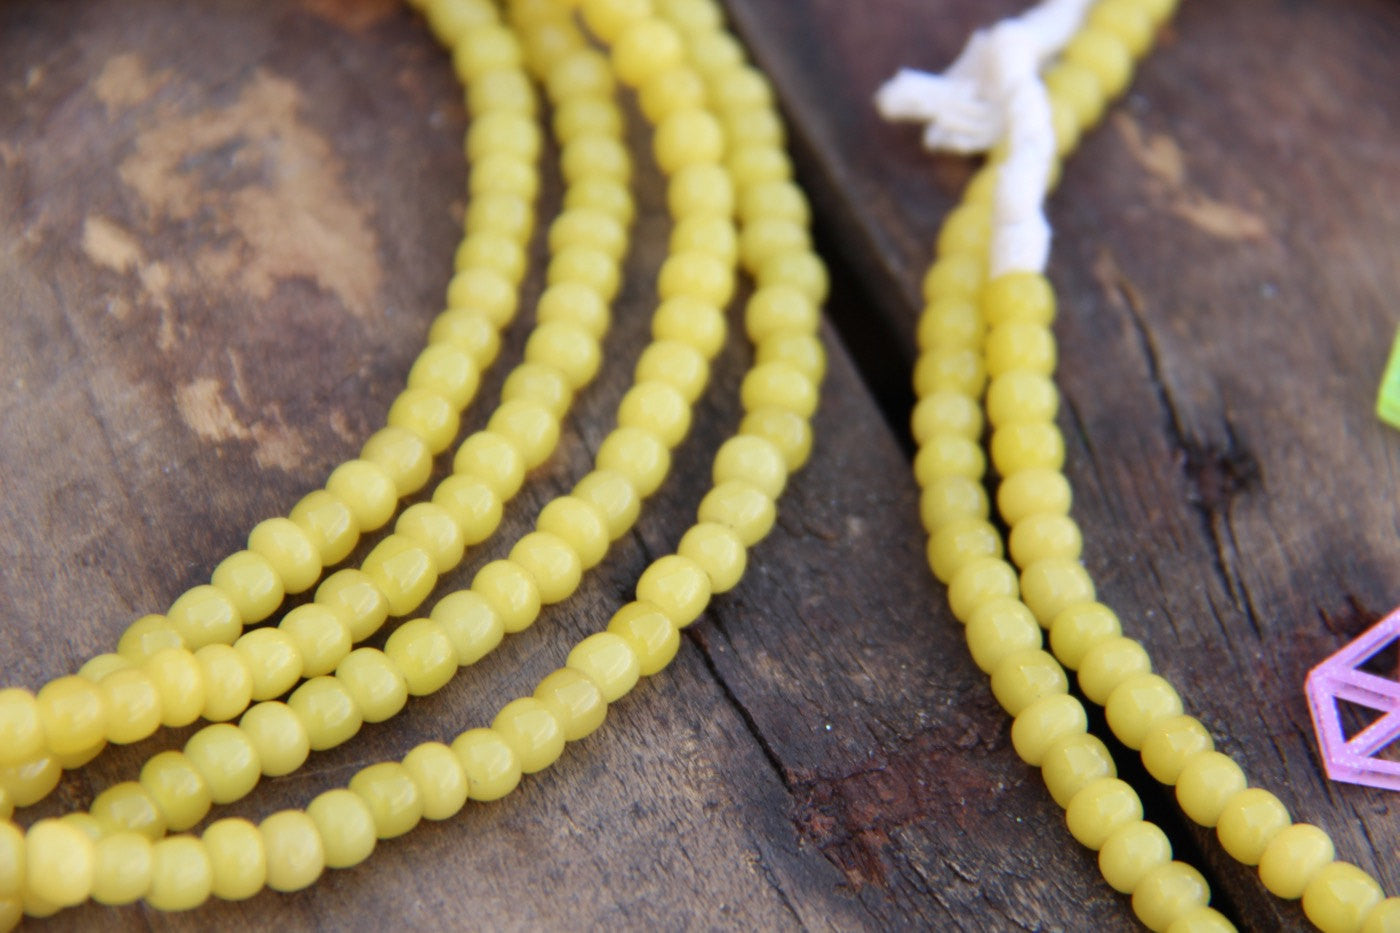 Buttercup: Vintage French Yellow Glass Rondelle Beads, Approx 4mm - ShopWomanShopsWorld.com. Bone Beads, Tassels, Pom Poms, African Beads.